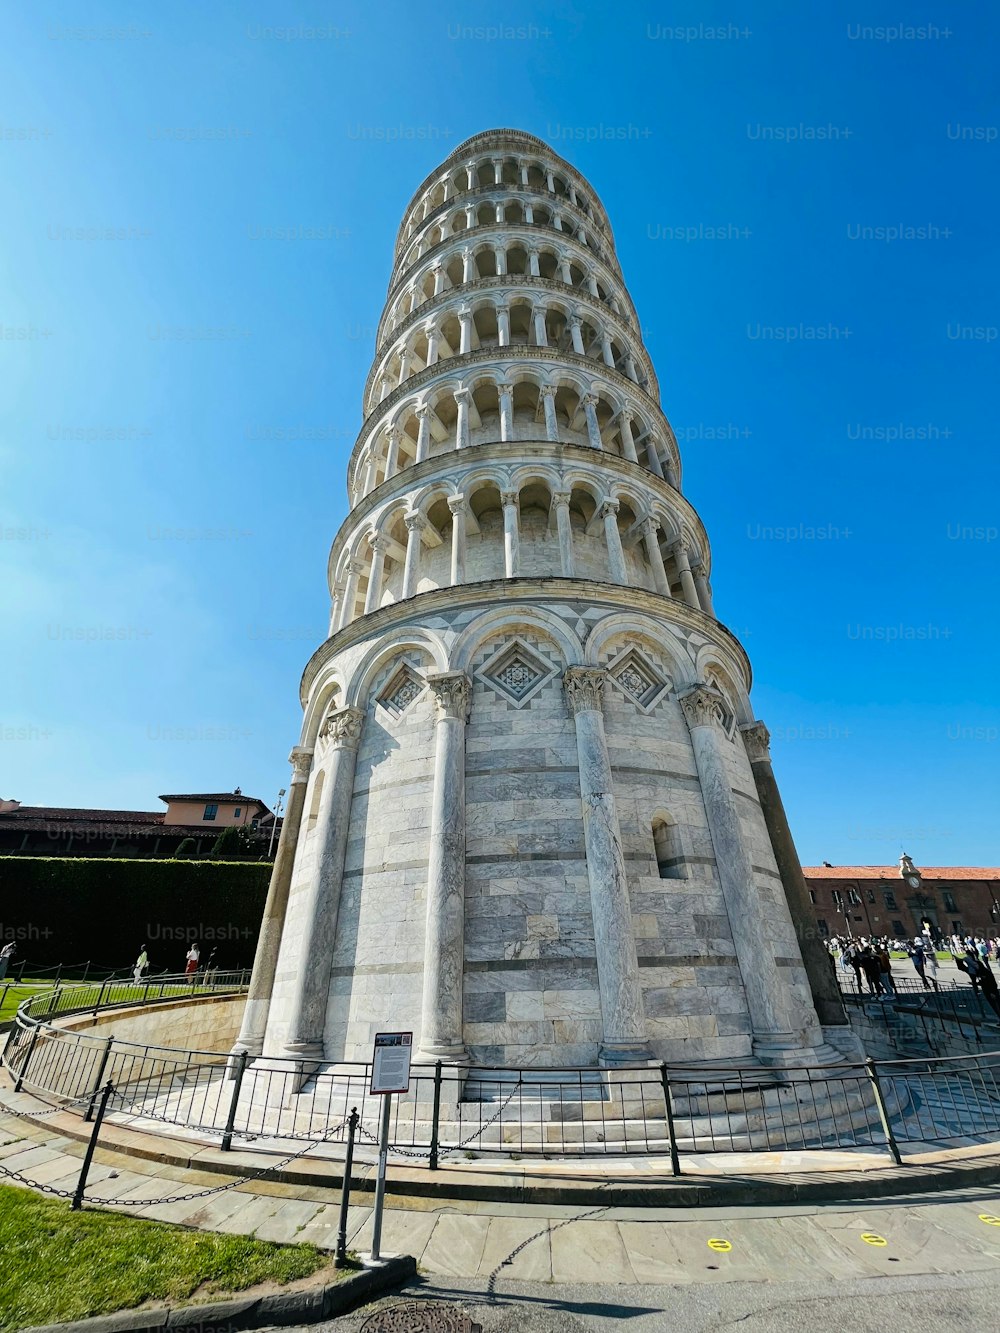 The majestic Leaning Tower of Pisa on a sunny day against a blue sky, Italy